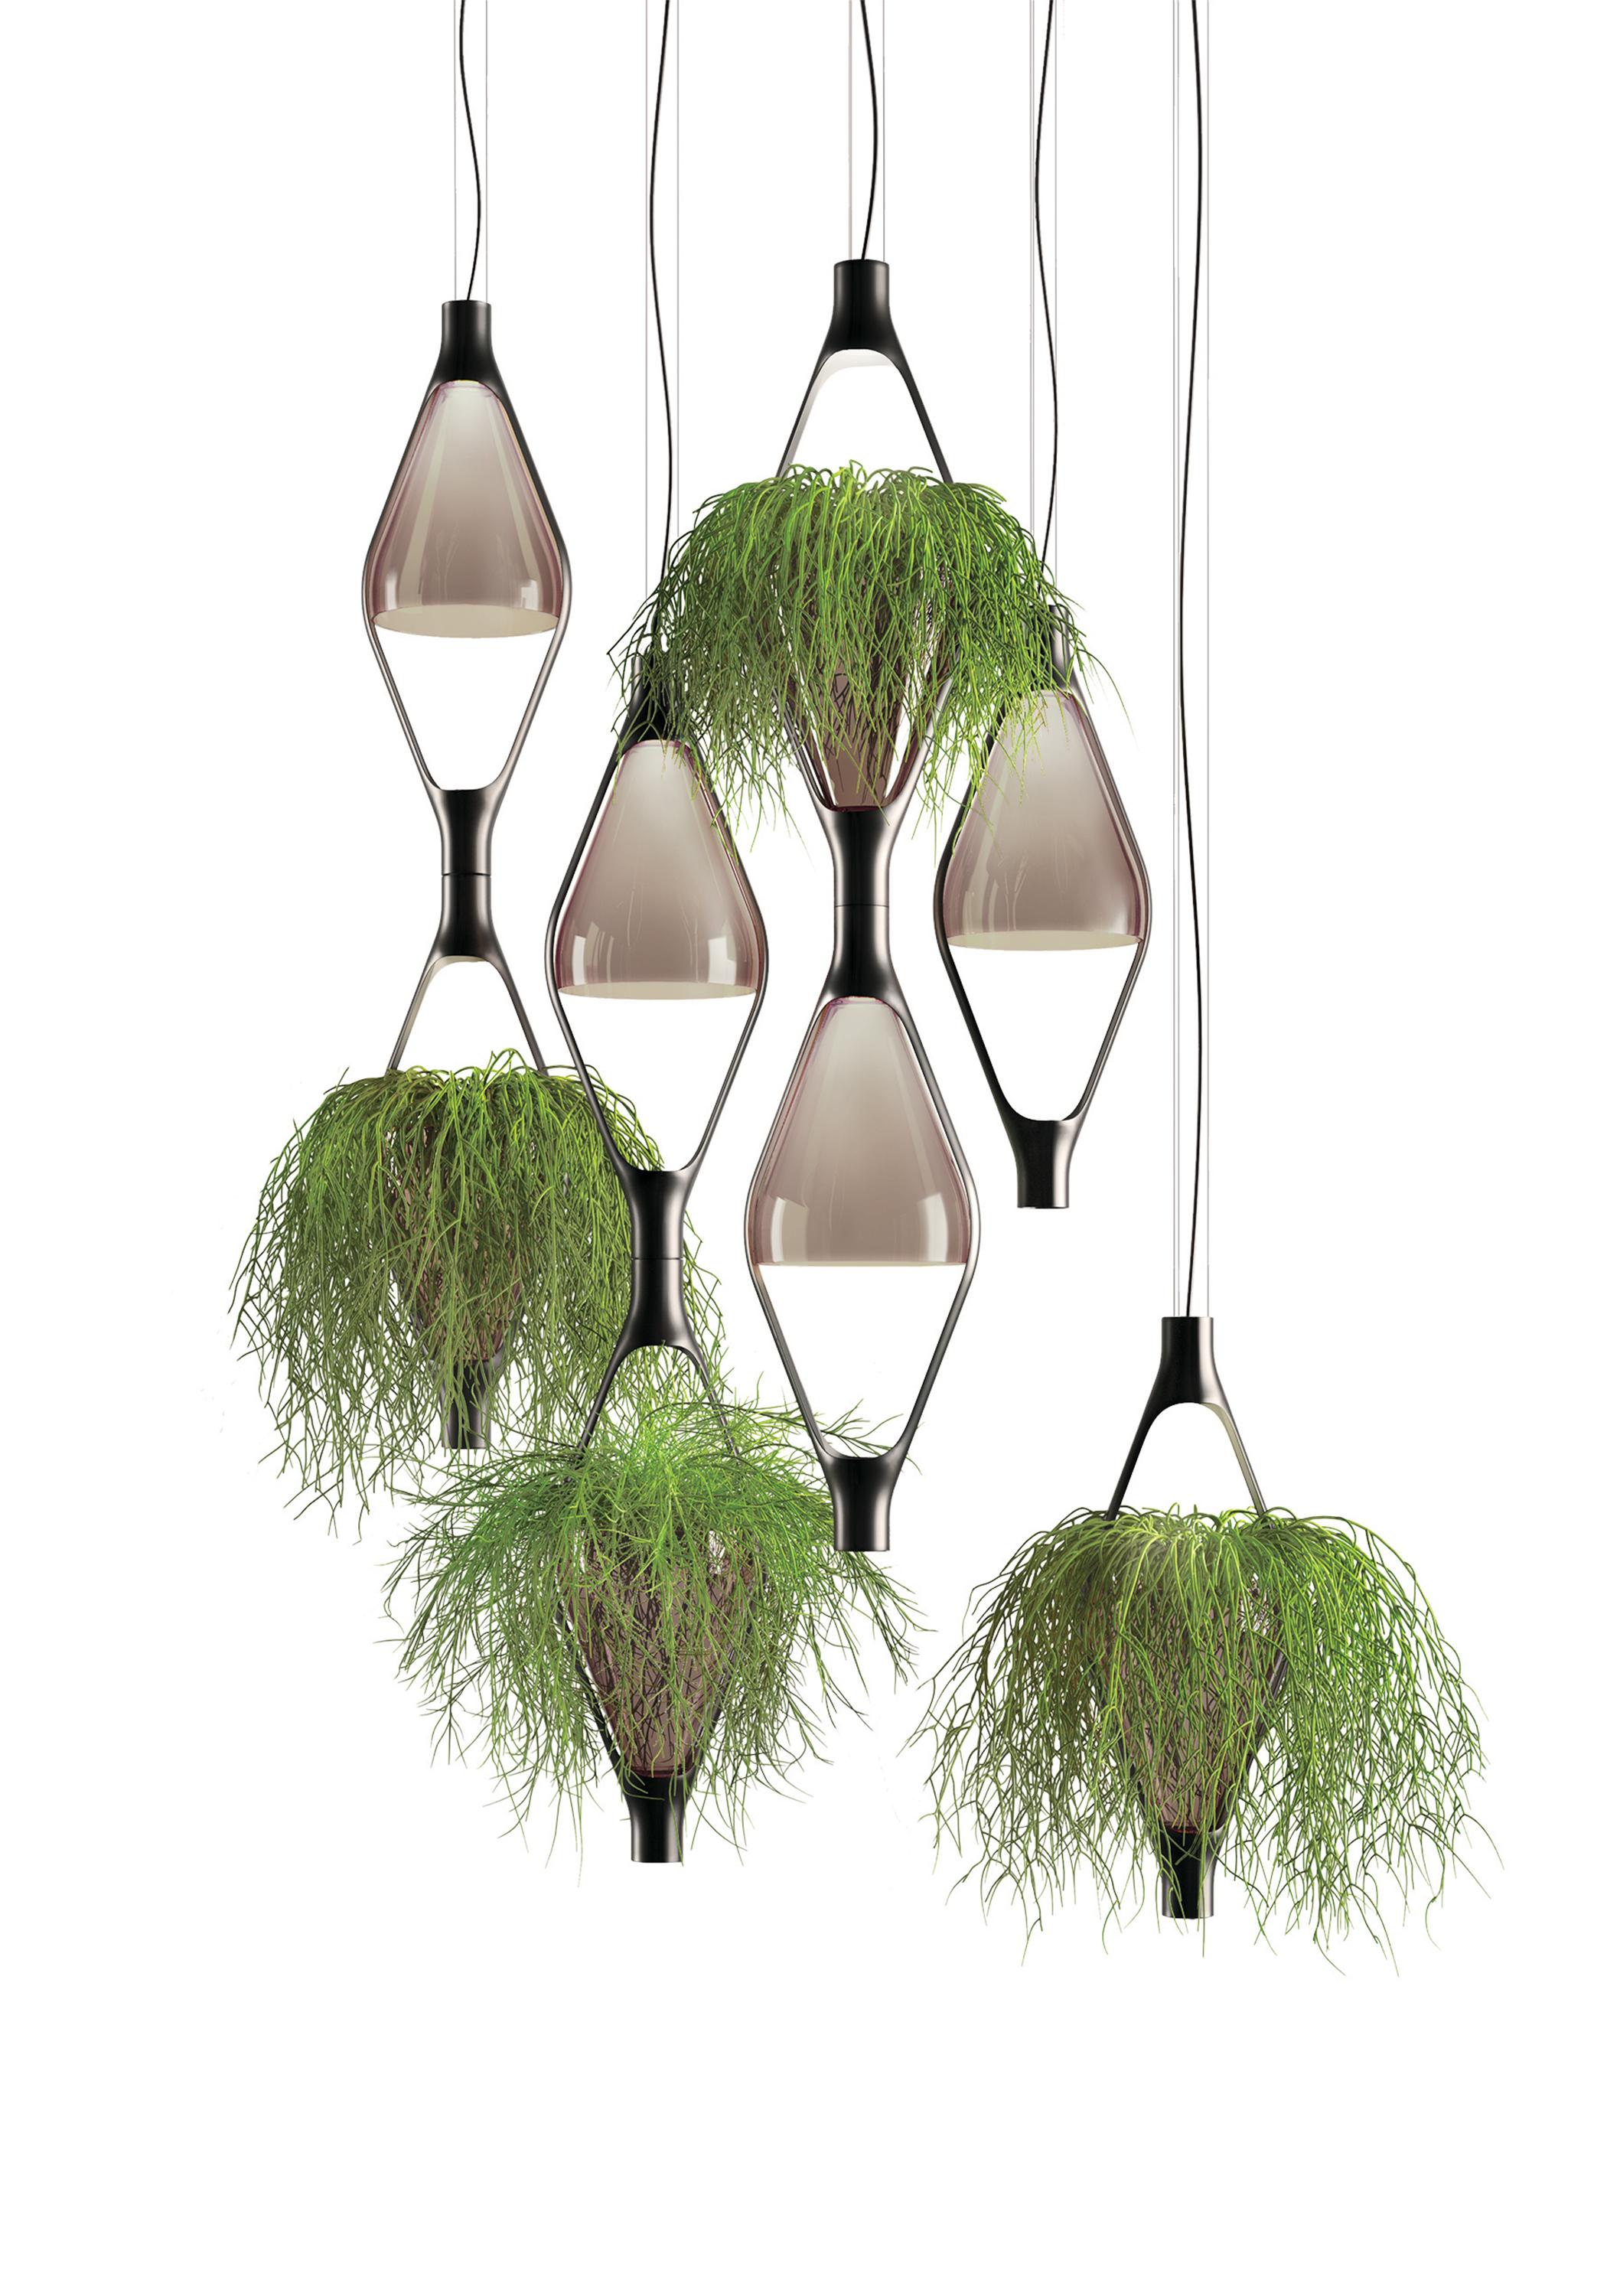 'Viceversa 2' modular suspension lamp by Noé Lawrance for KDLN in Smoke Grey.

Executed in smoke colored blown glass with a matte gray metallic structure. This unique suspension lamp doubles seamlessly as a hanging planter through the use of its